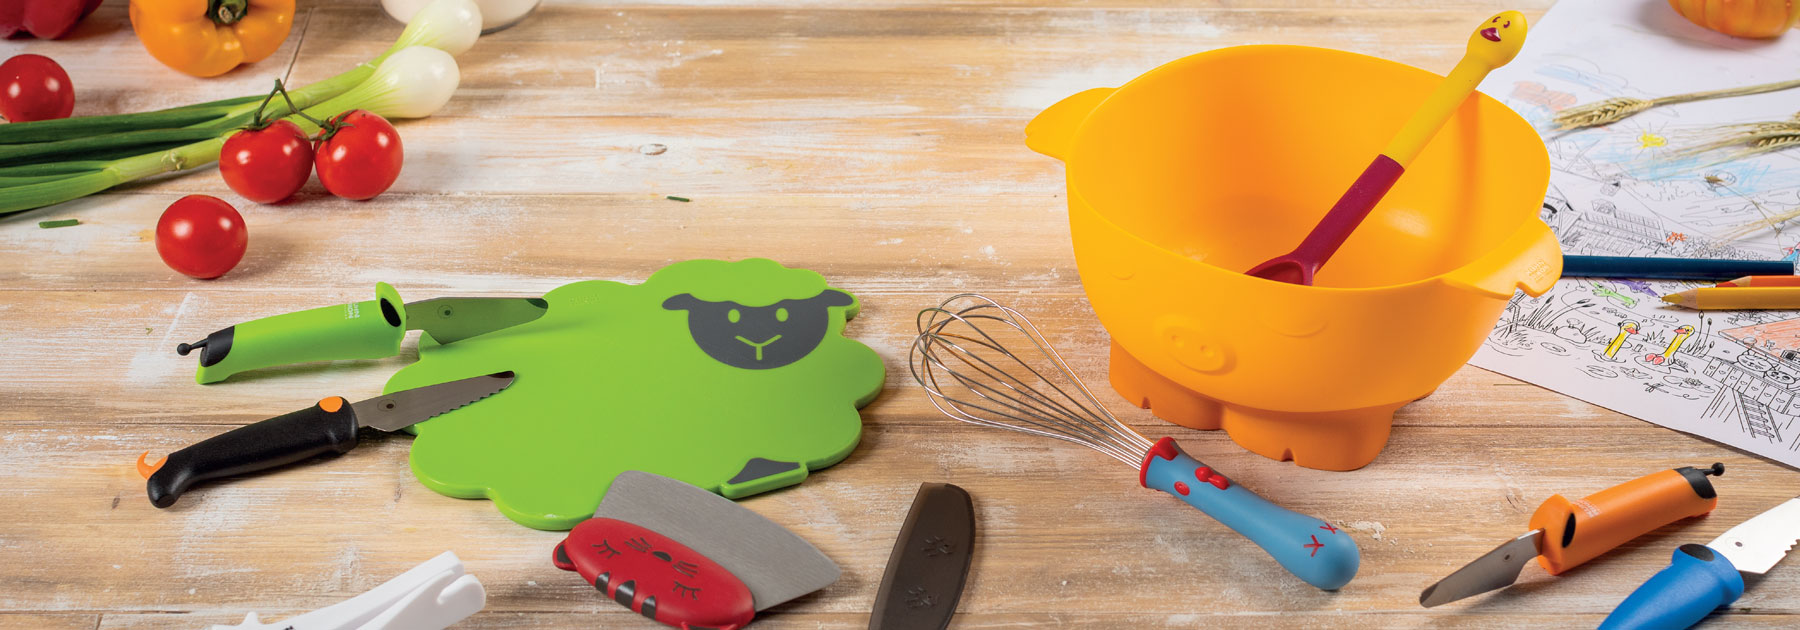 child friendly cooks tools and knives for little chefs and young cooks. kinderkitchen®, born and bred in the Kuhn Rikon farmyard